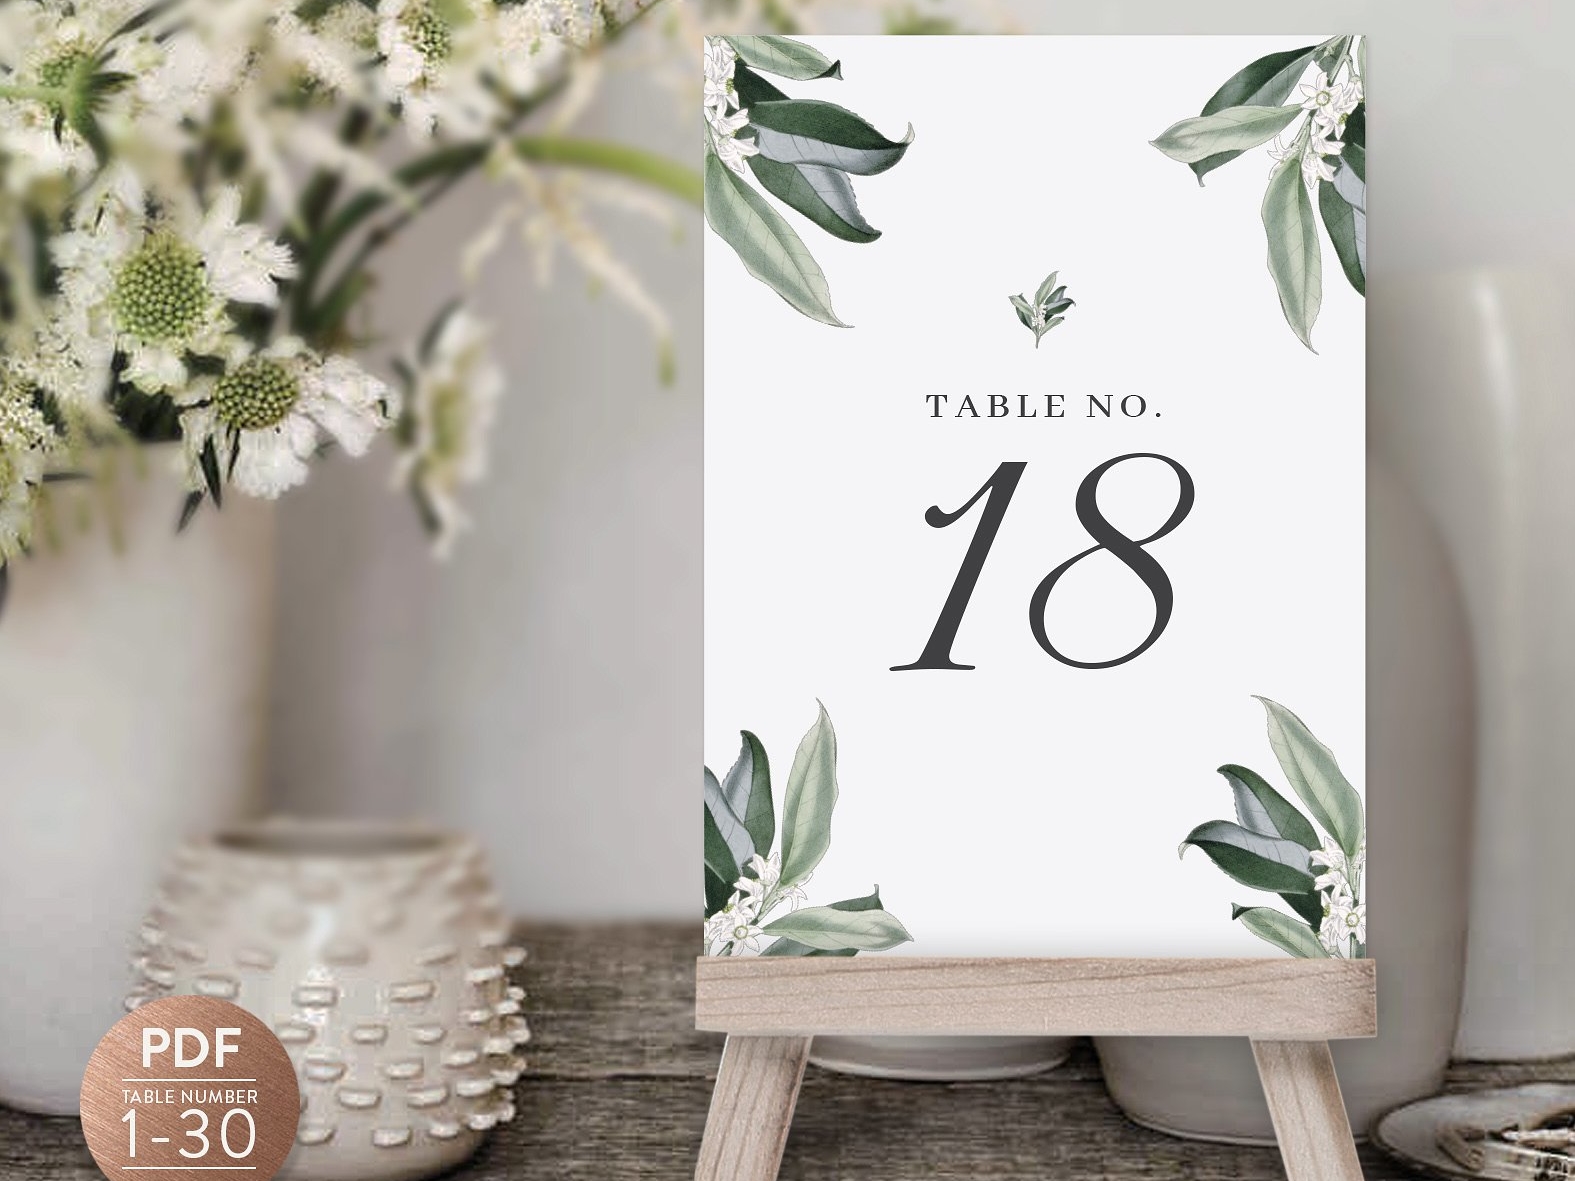 free-psd-wedding-still-life-mockup-with-table-number-design